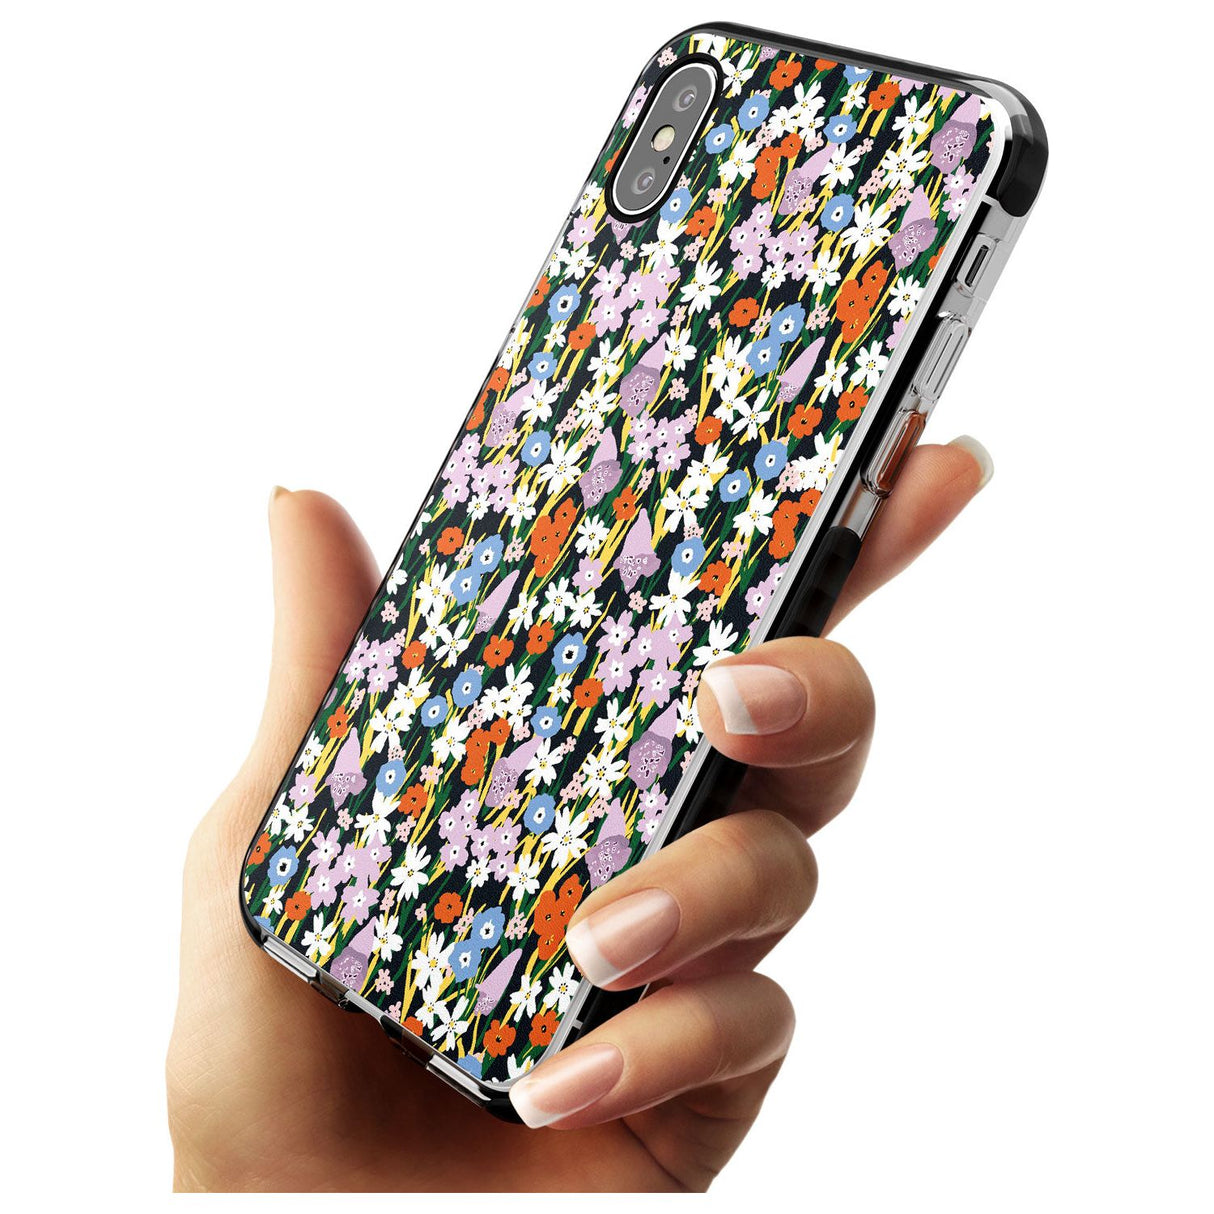 Energetic Floral Mix: Solid Pink Fade Impact Phone Case for iPhone X XS Max XR